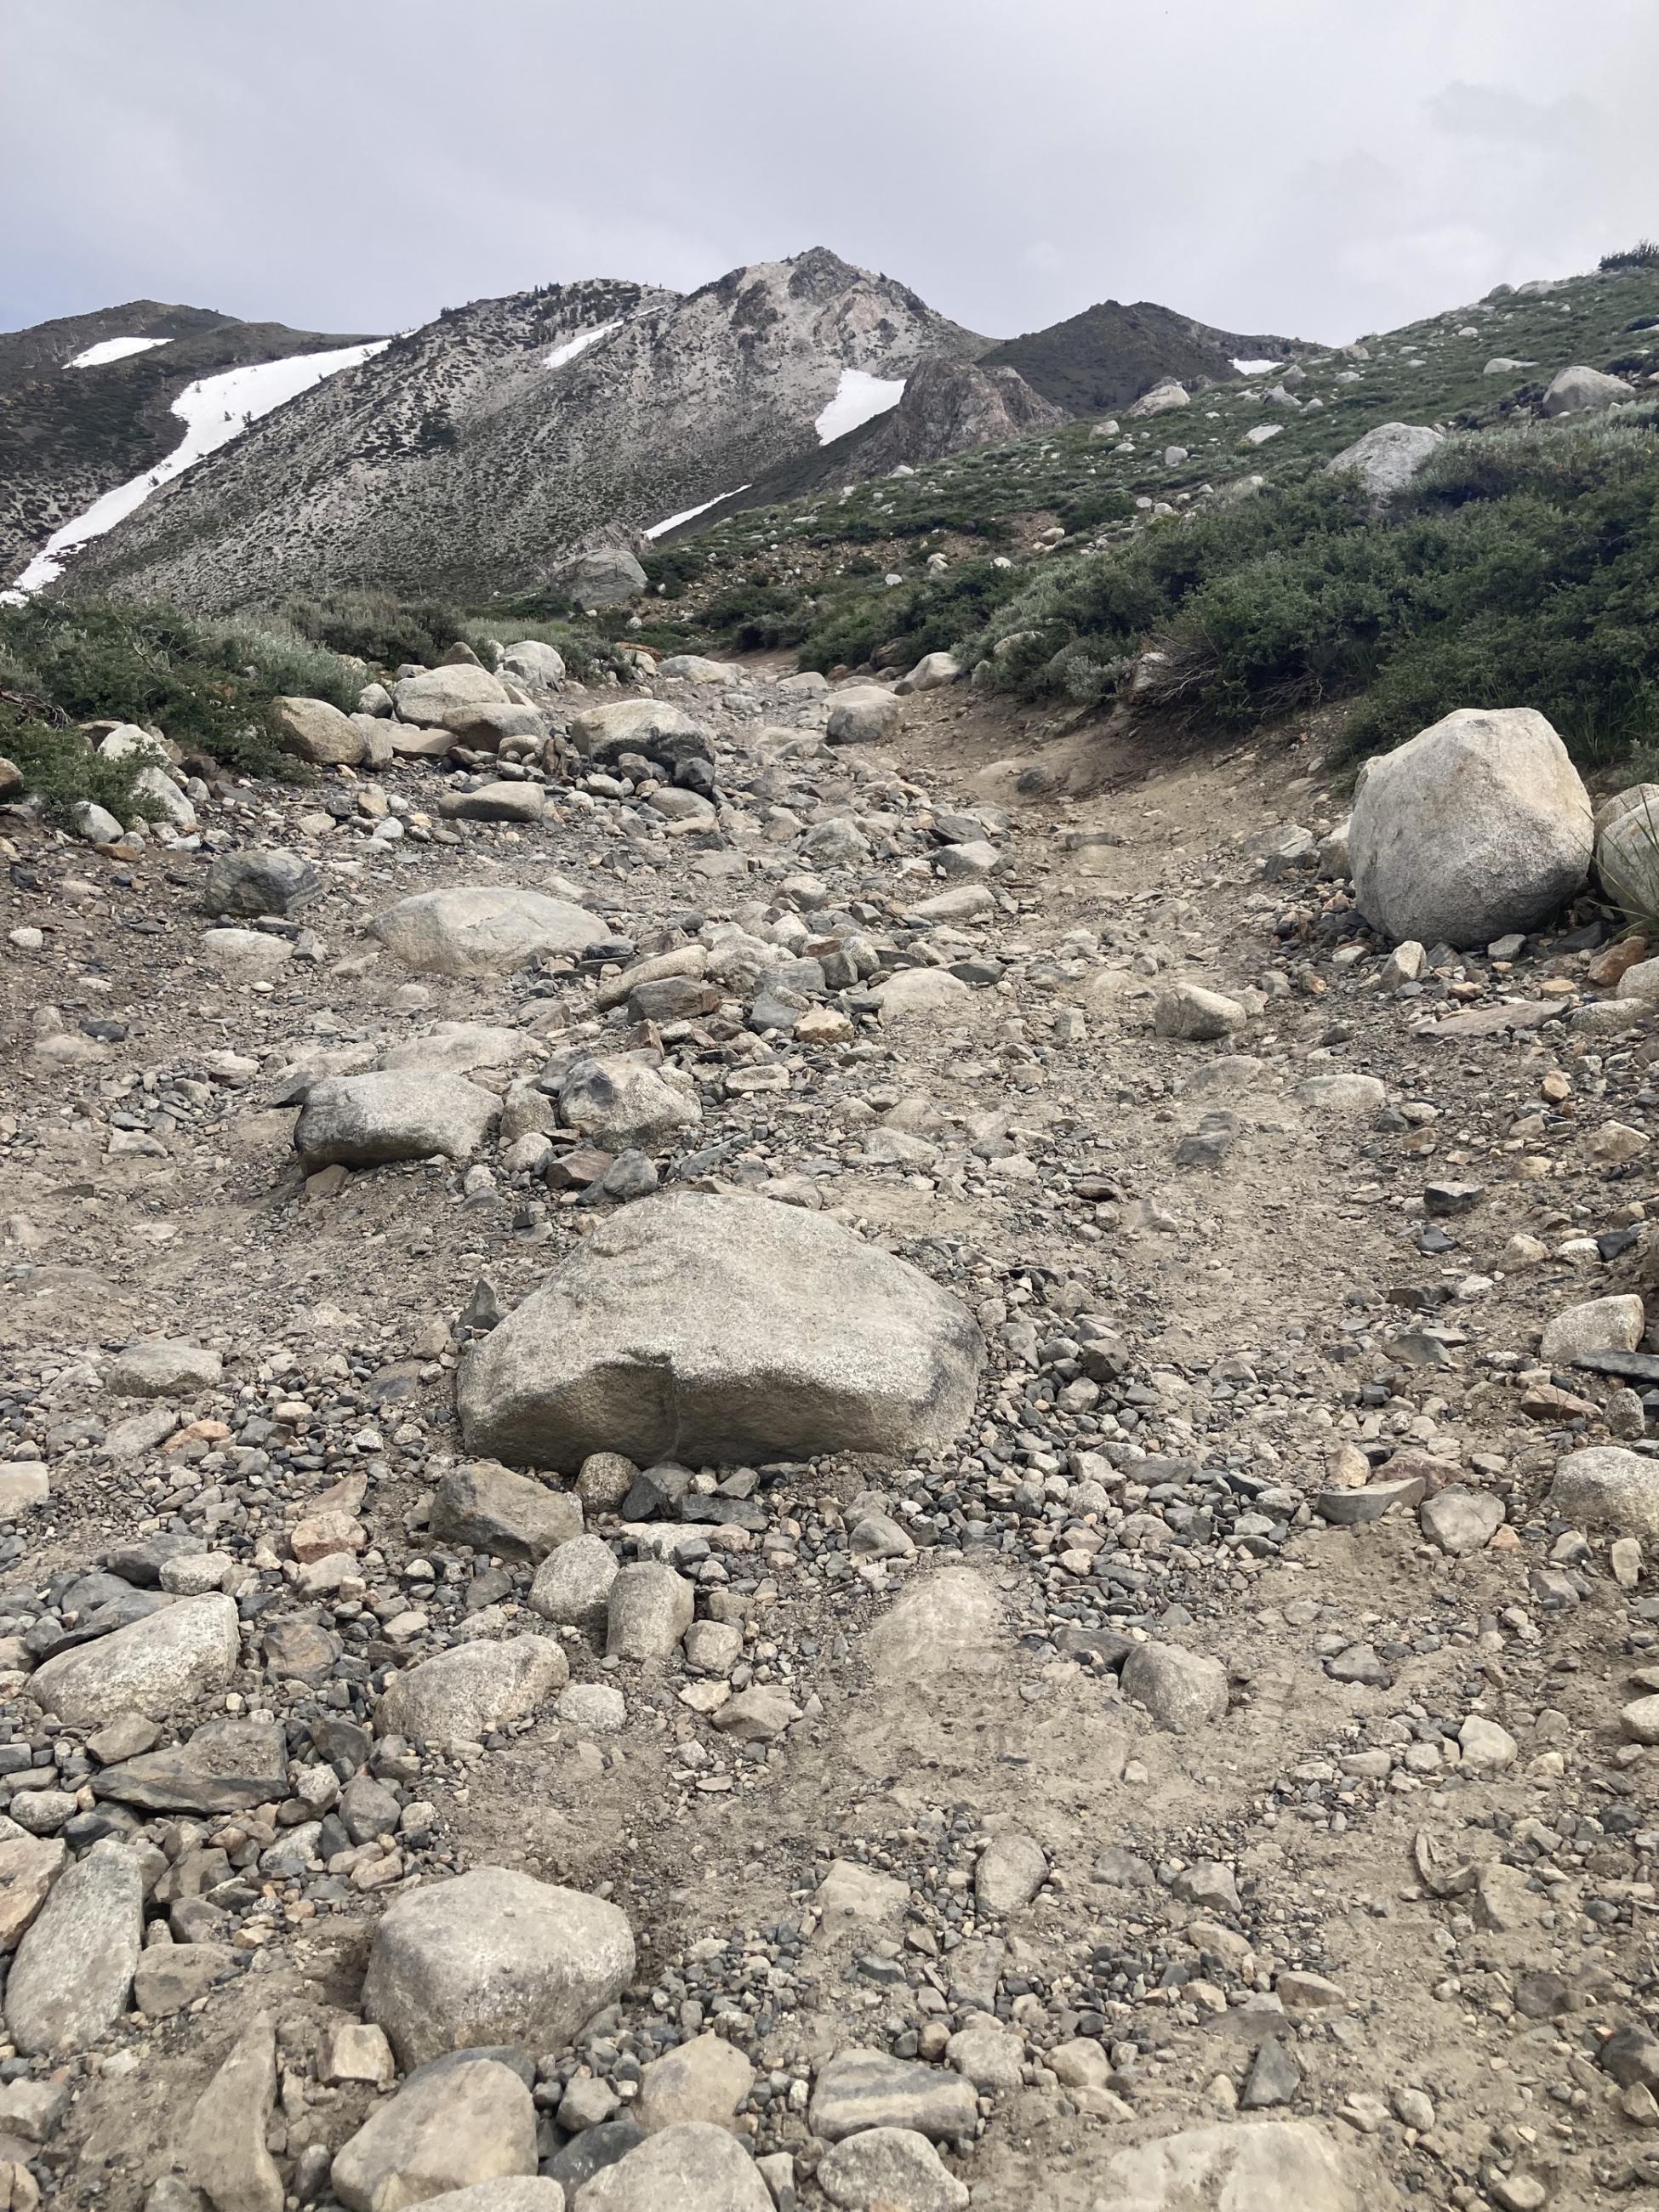 Image showing boulders and large rocks on very rough dirt road going to Laure Lakes